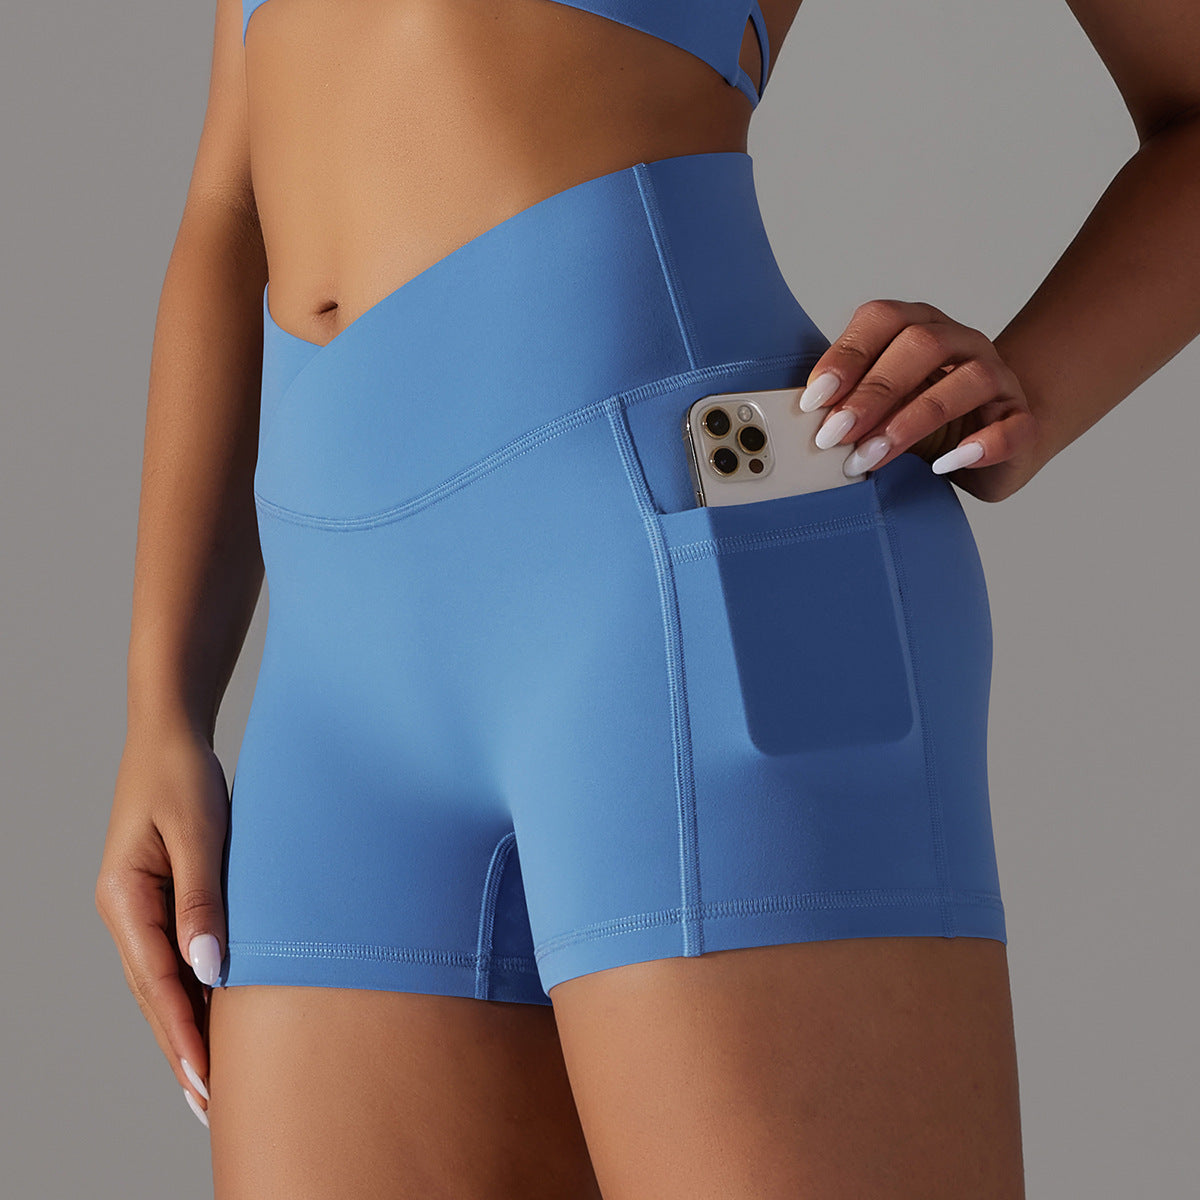 Women's Workout Shorts with Phone Pocket